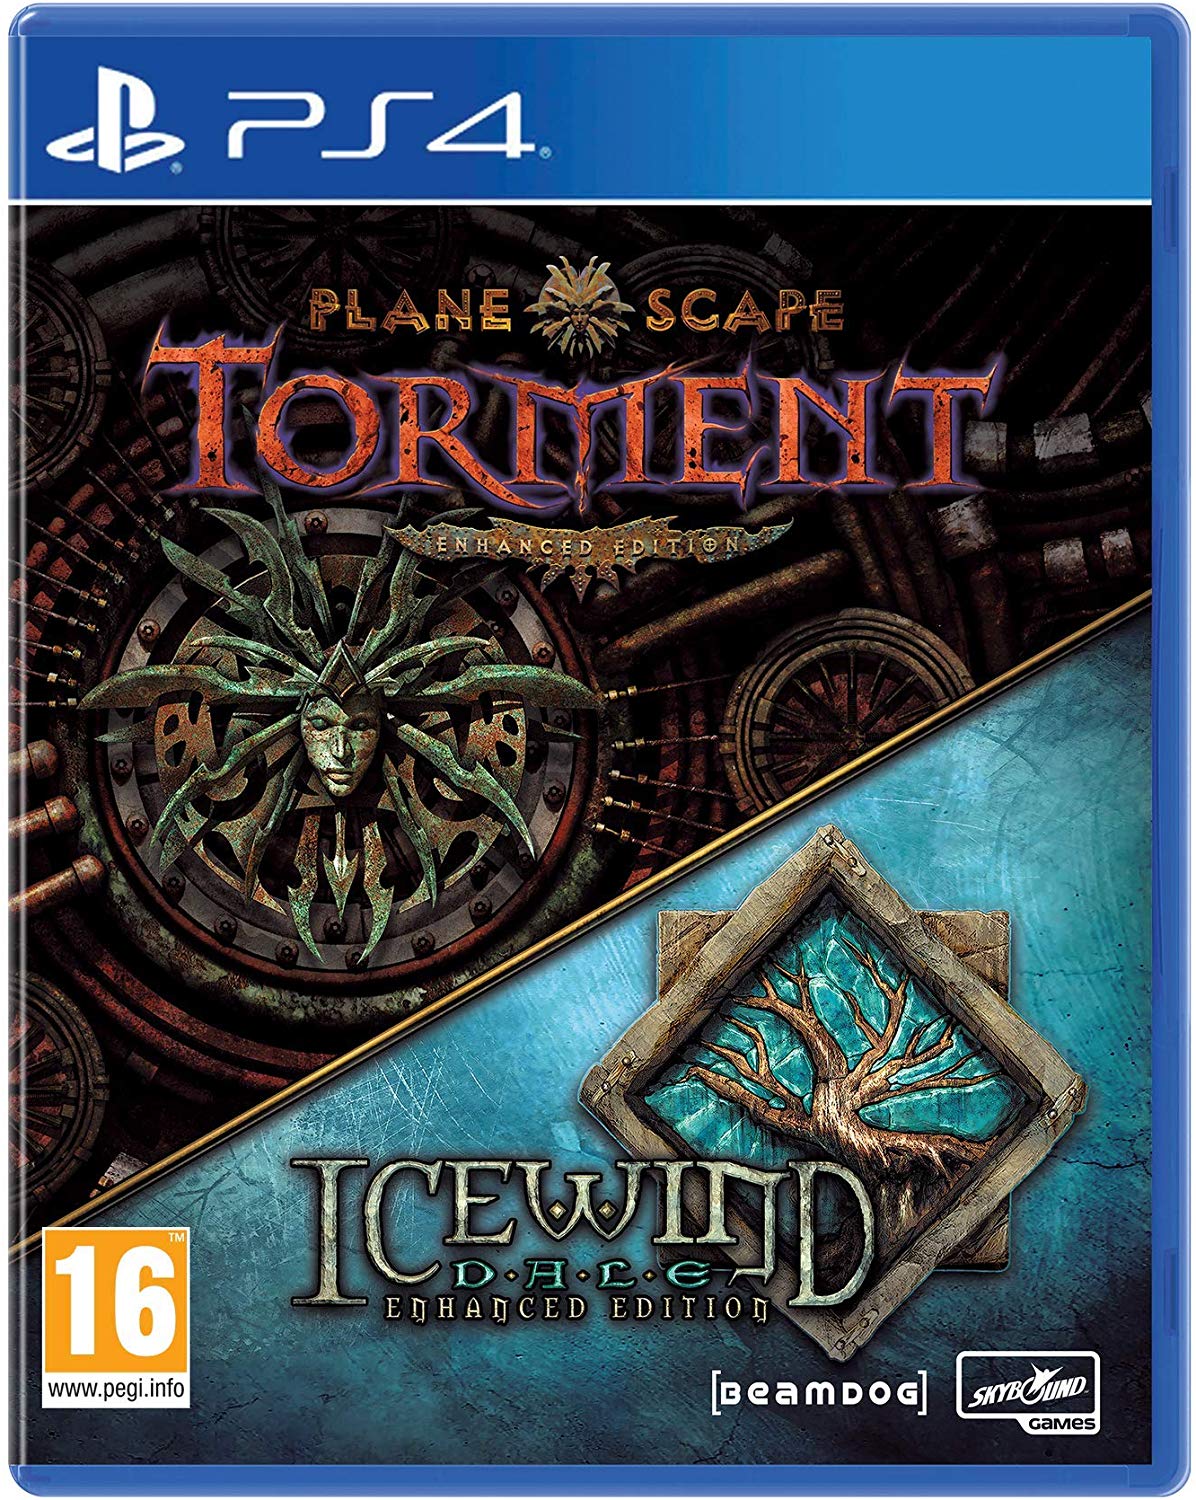 Planescape: Torment & Icewind Dale Enhanced Edition - PS4 | Yard's Games Ltd